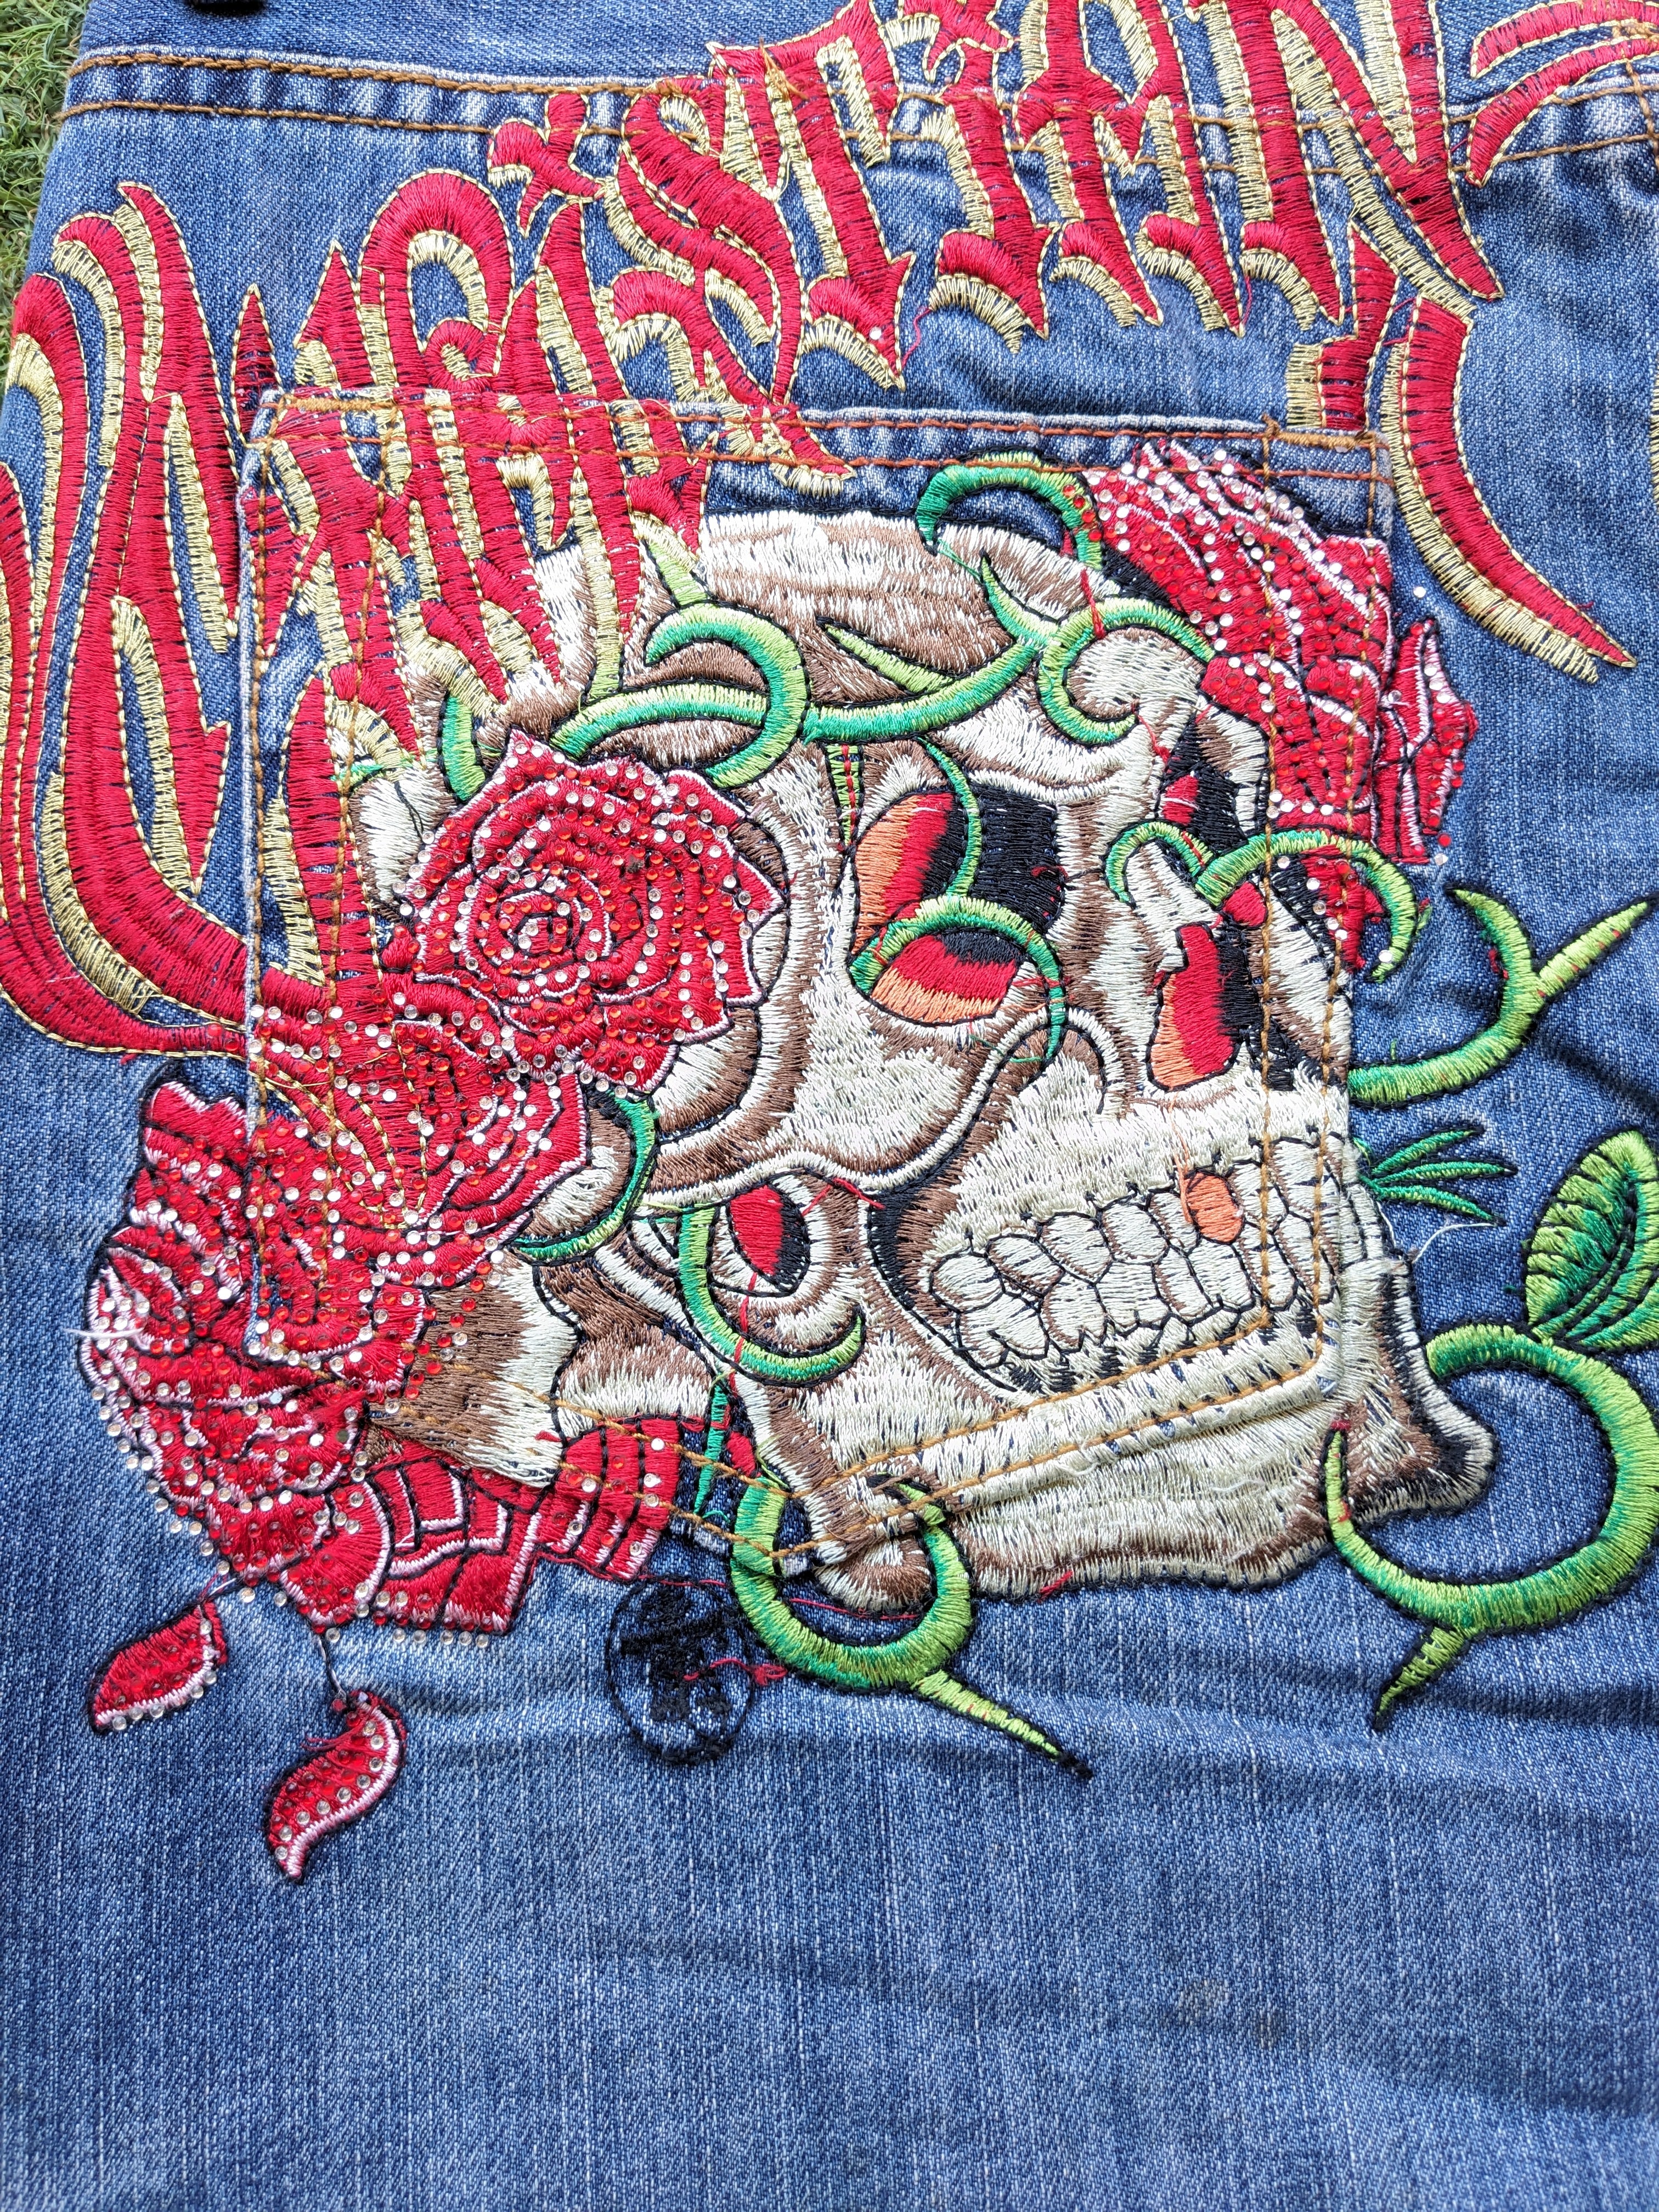 Christian Audigier Skull Embroidered Jeans – Bombay Closet Cleanse